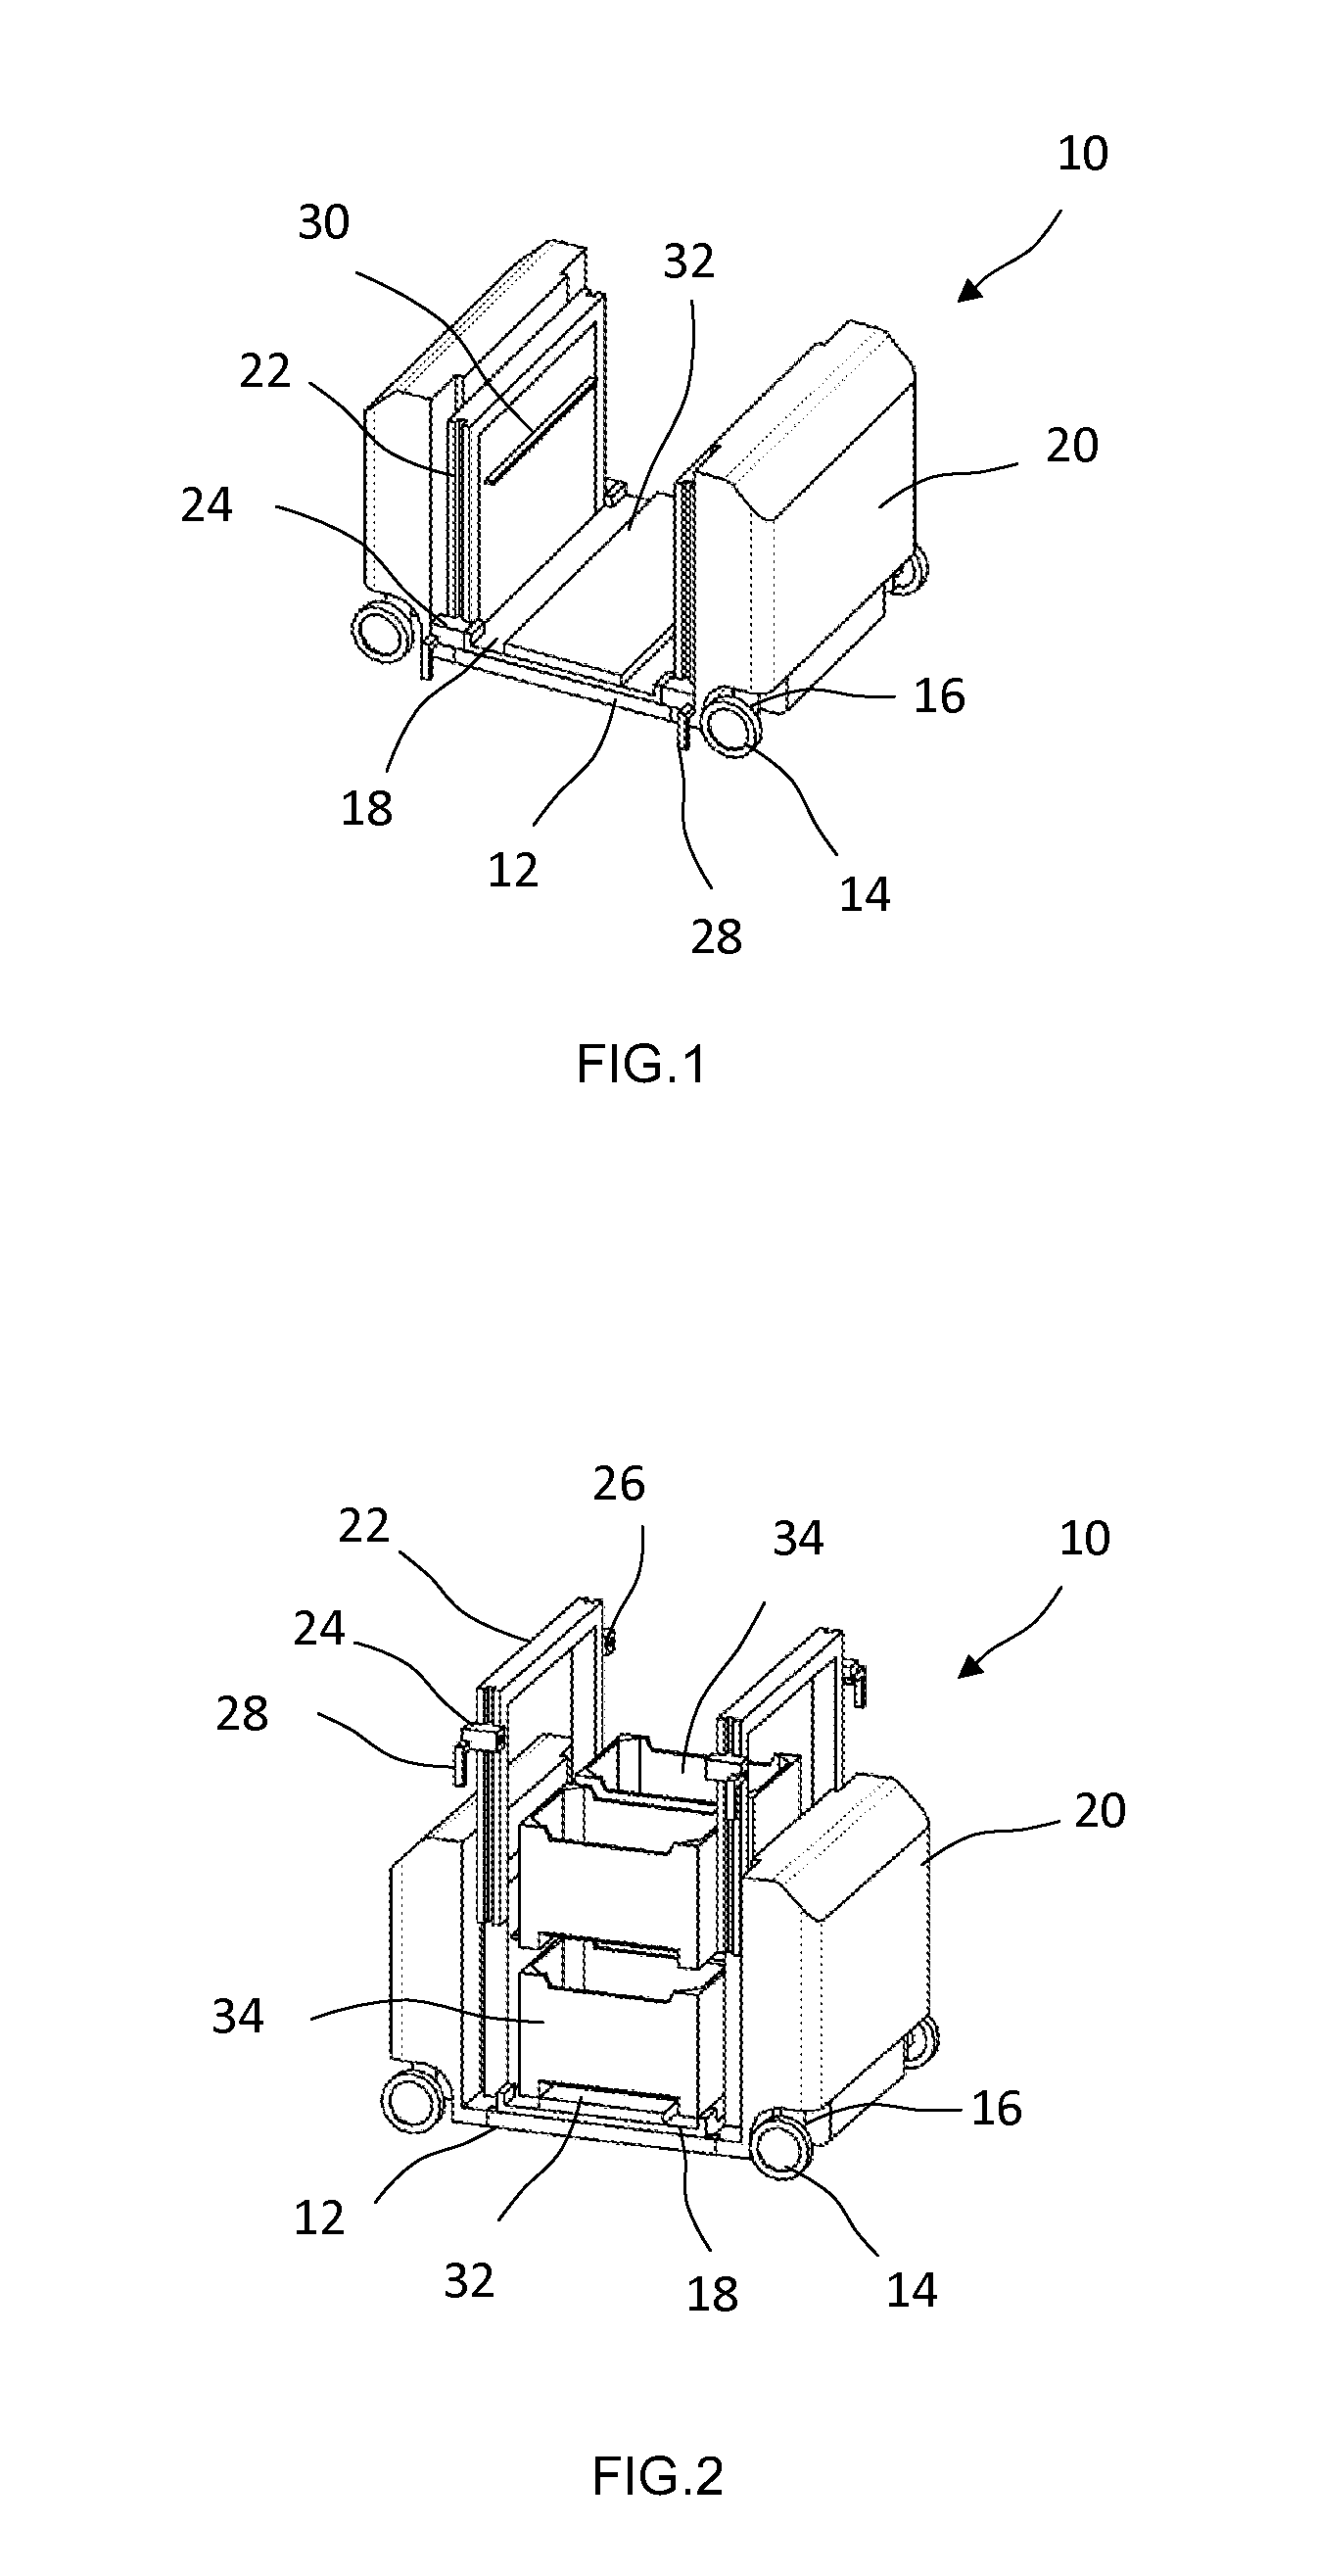 Self-lifting robotic device with movable carriages